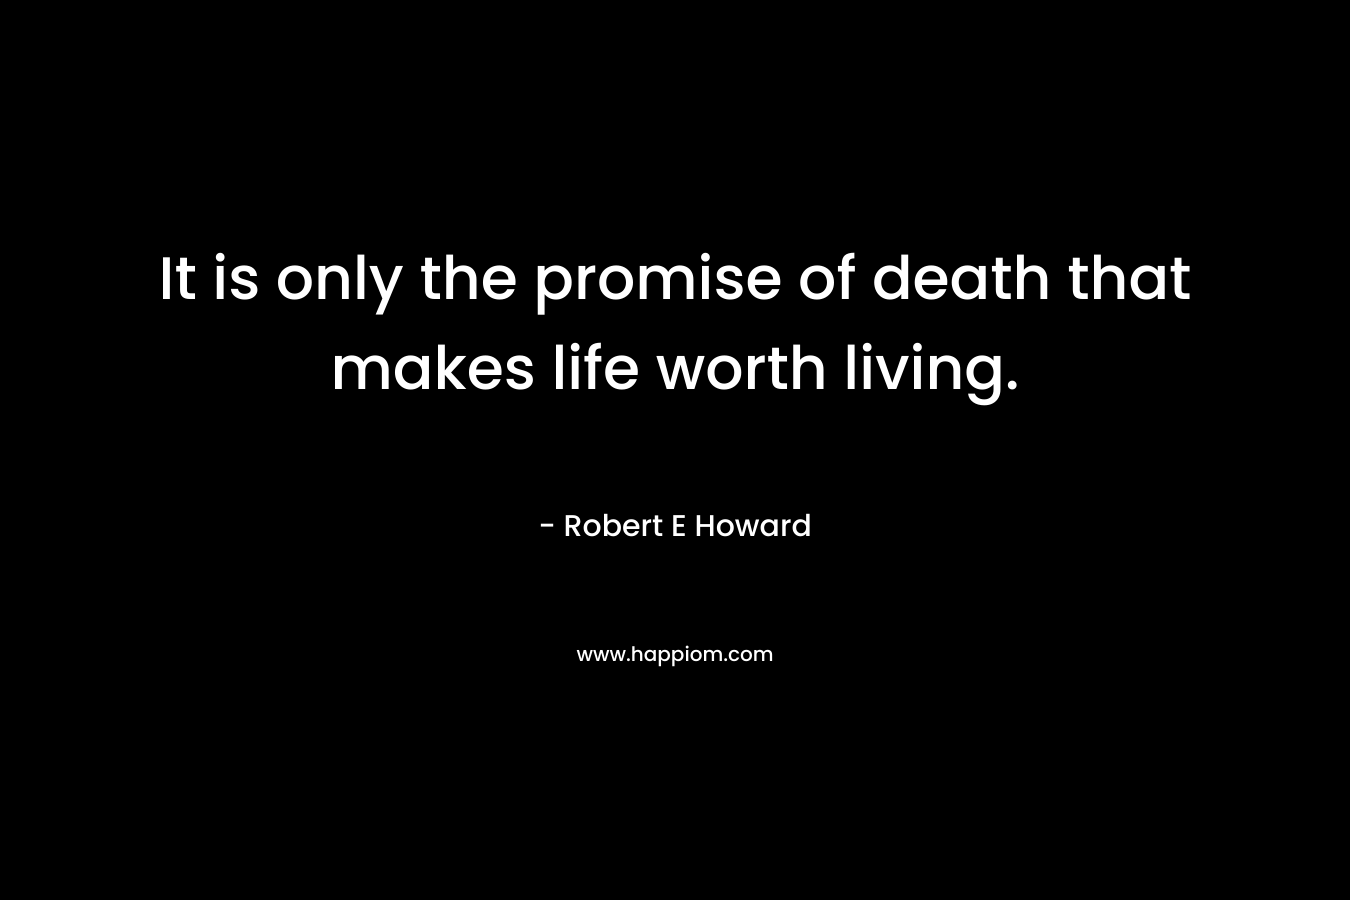 It is only the promise of death that makes life worth living.